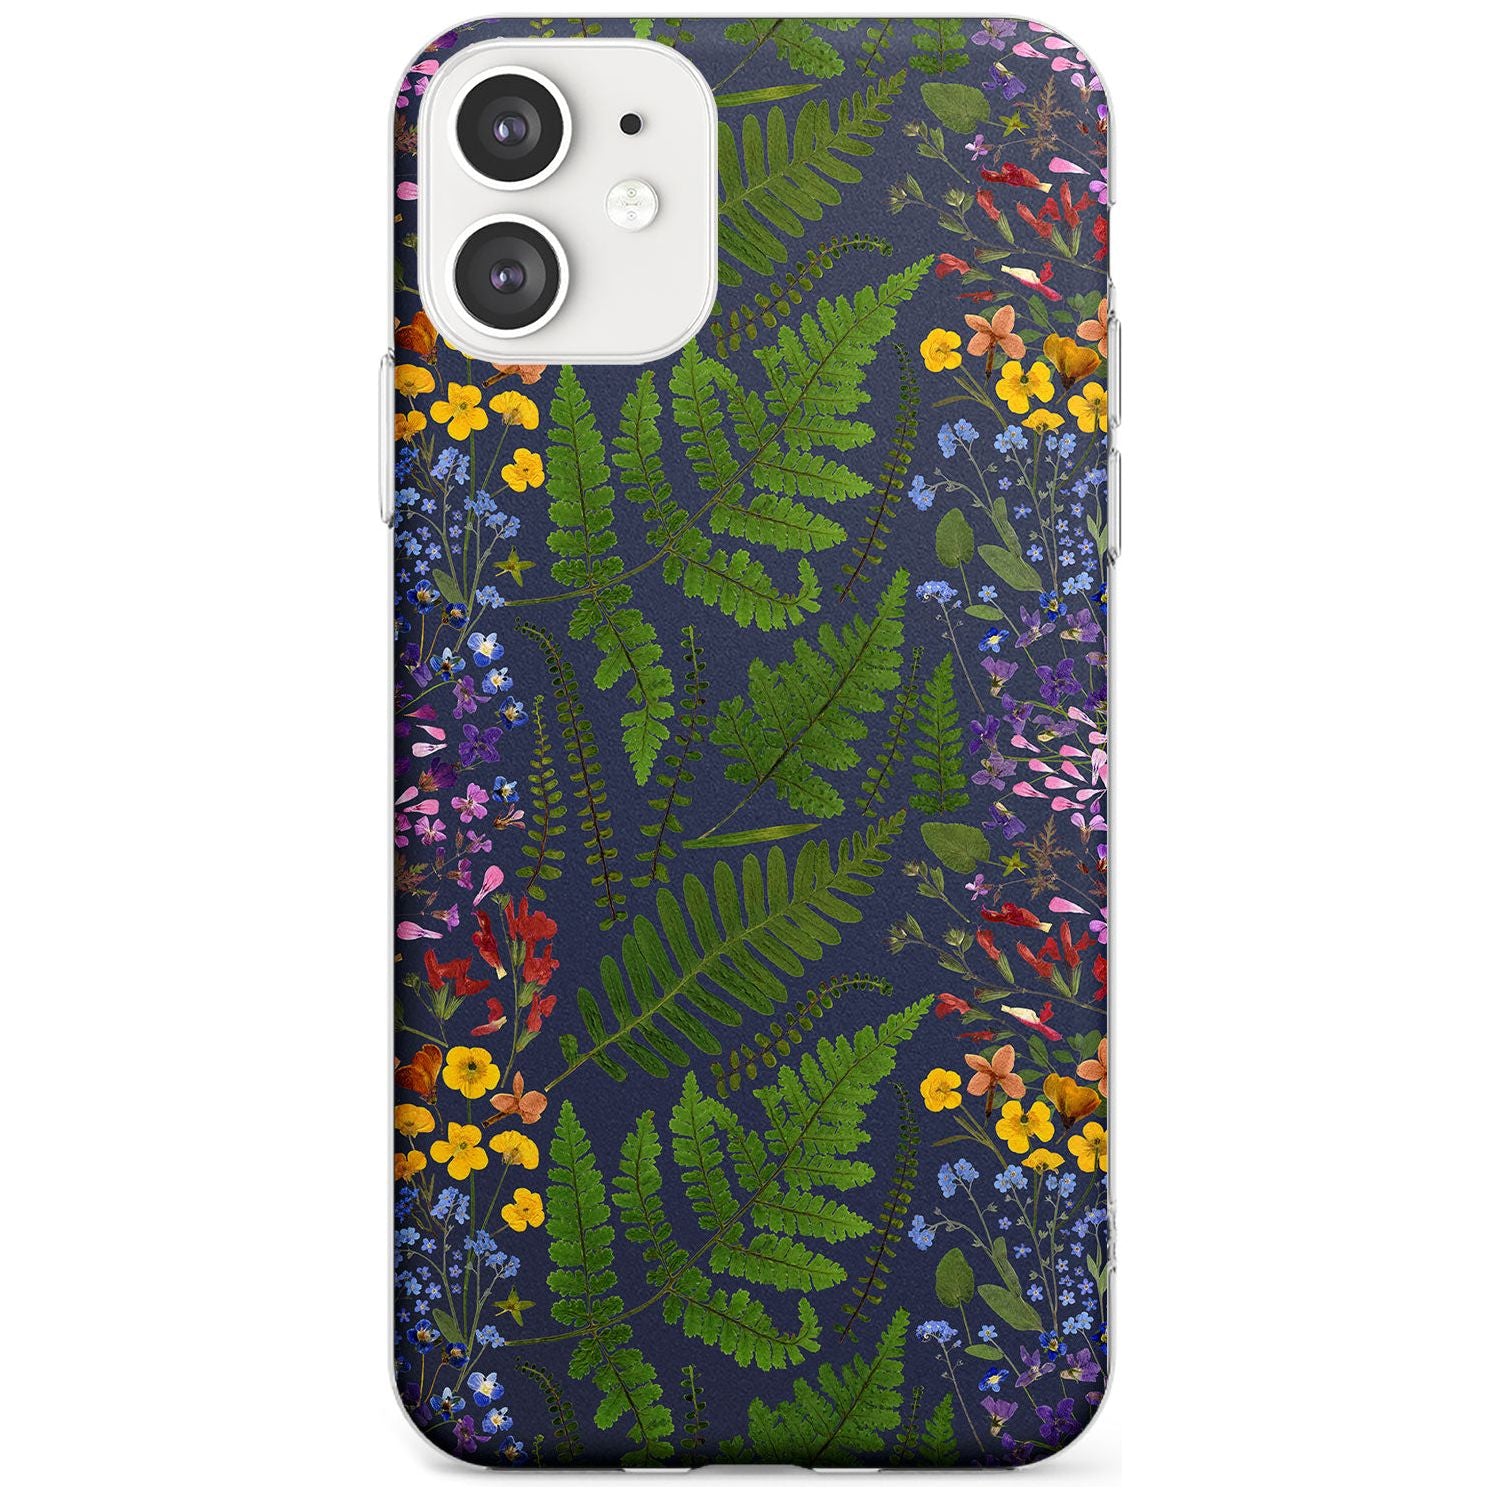 Busy Floral and Fern Design - Navy Slim TPU Phone Case for iPhone 11